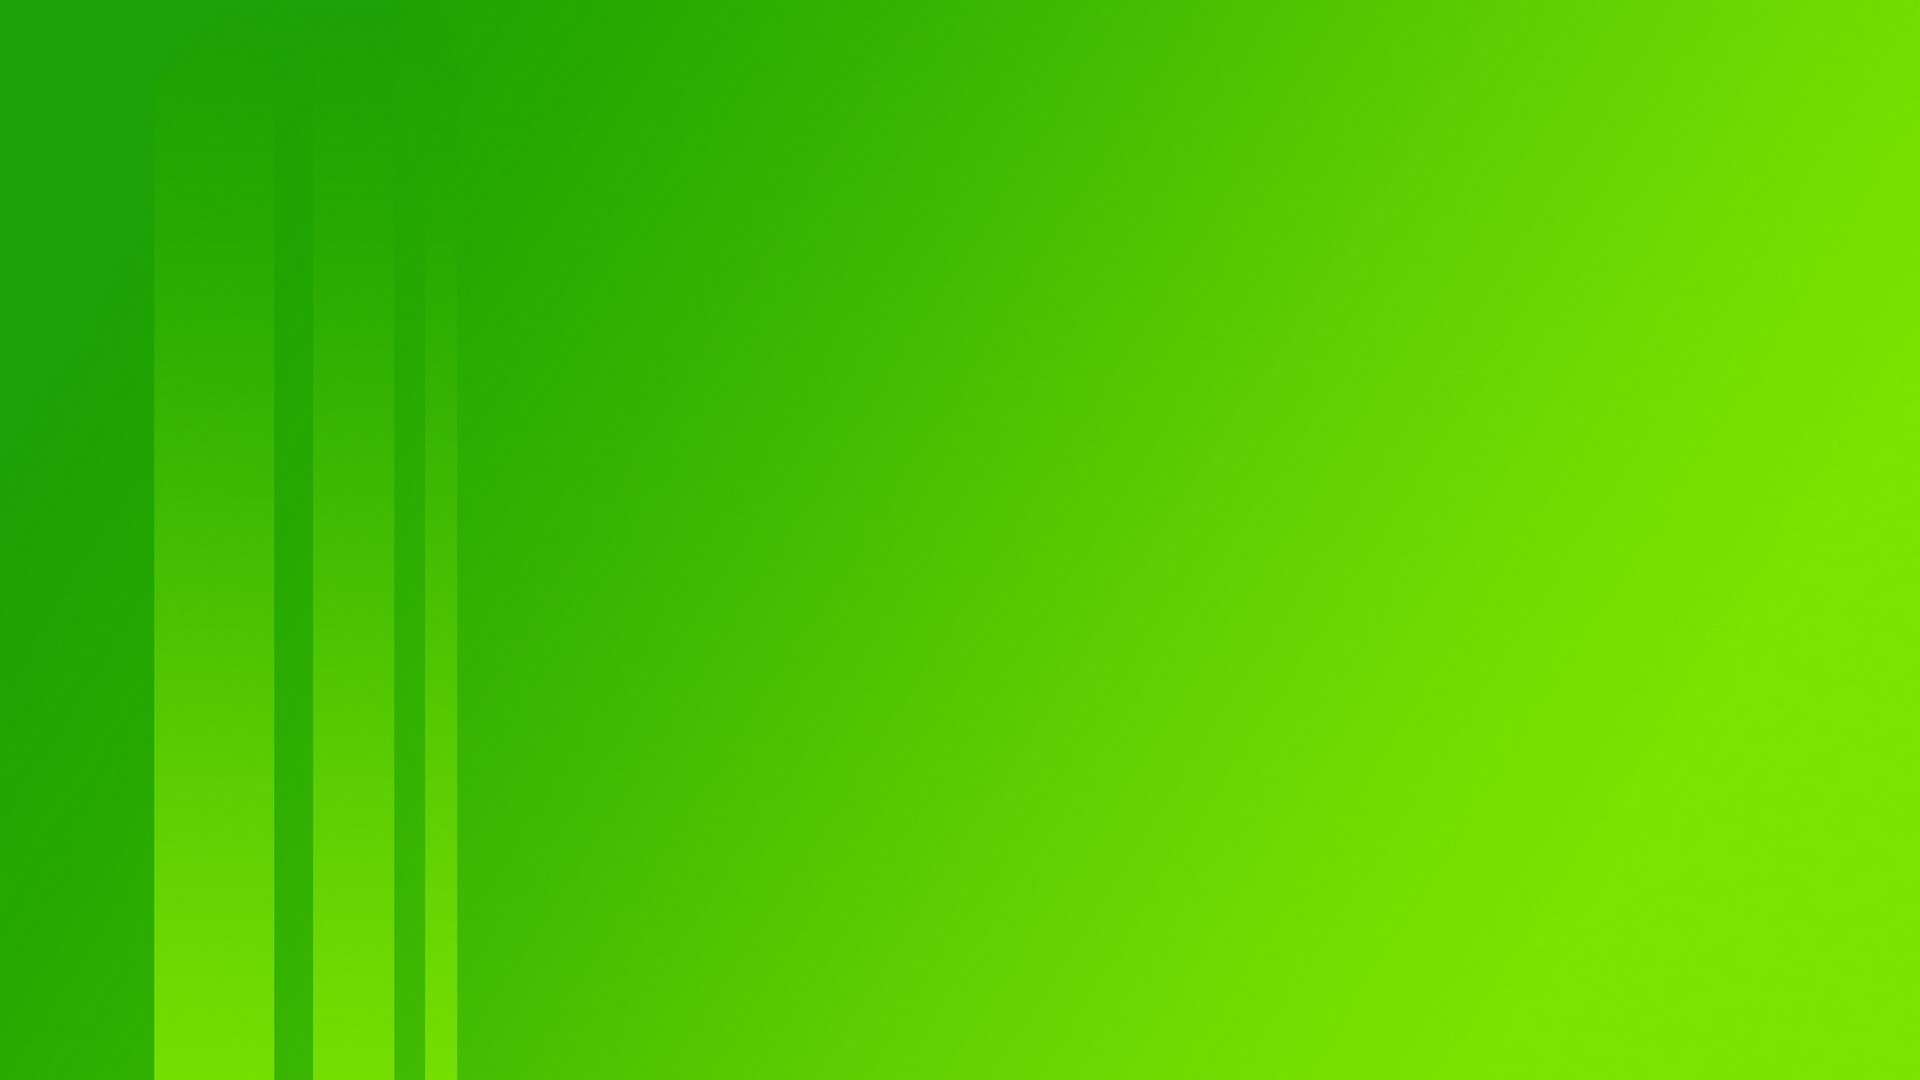 Solid Bright Green Background Wallpaper